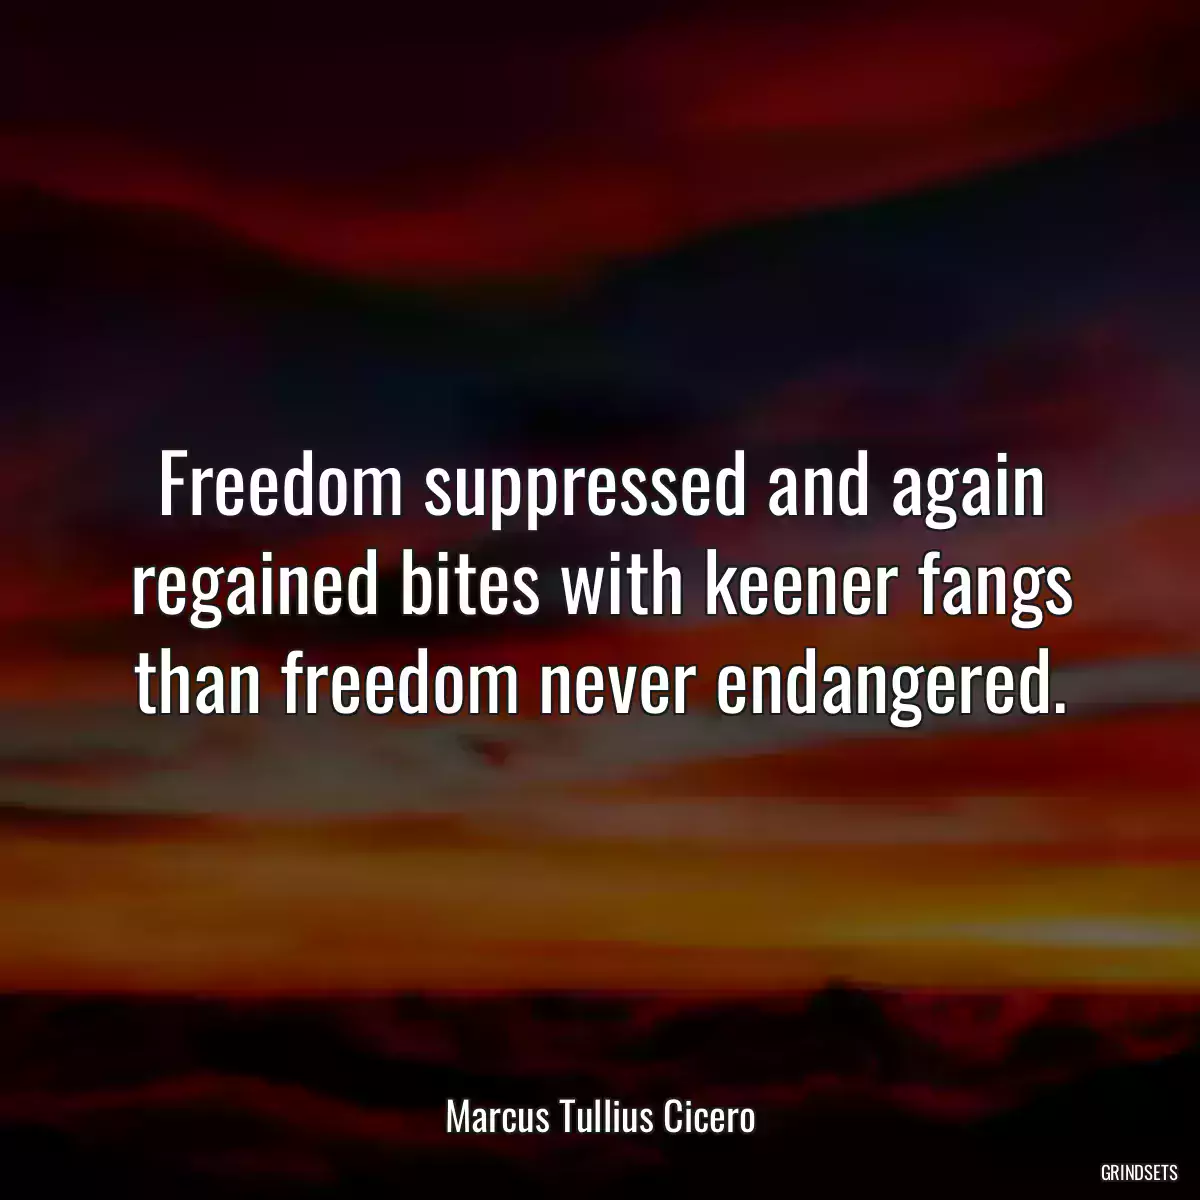 Freedom suppressed and again regained bites with keener fangs than freedom never endangered.